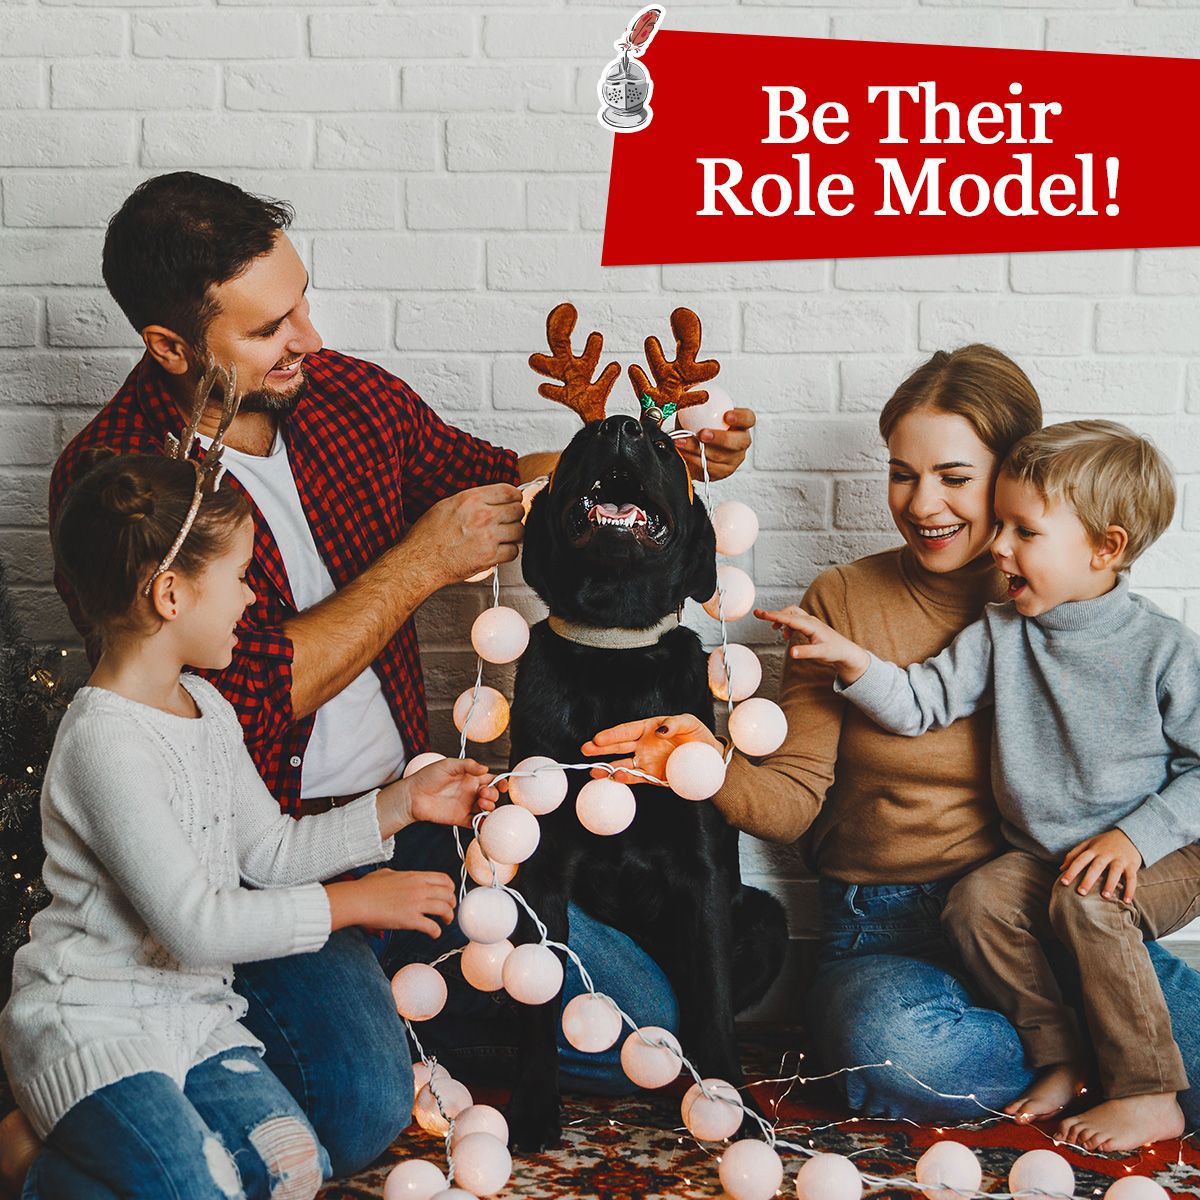 Be Their Role Model!